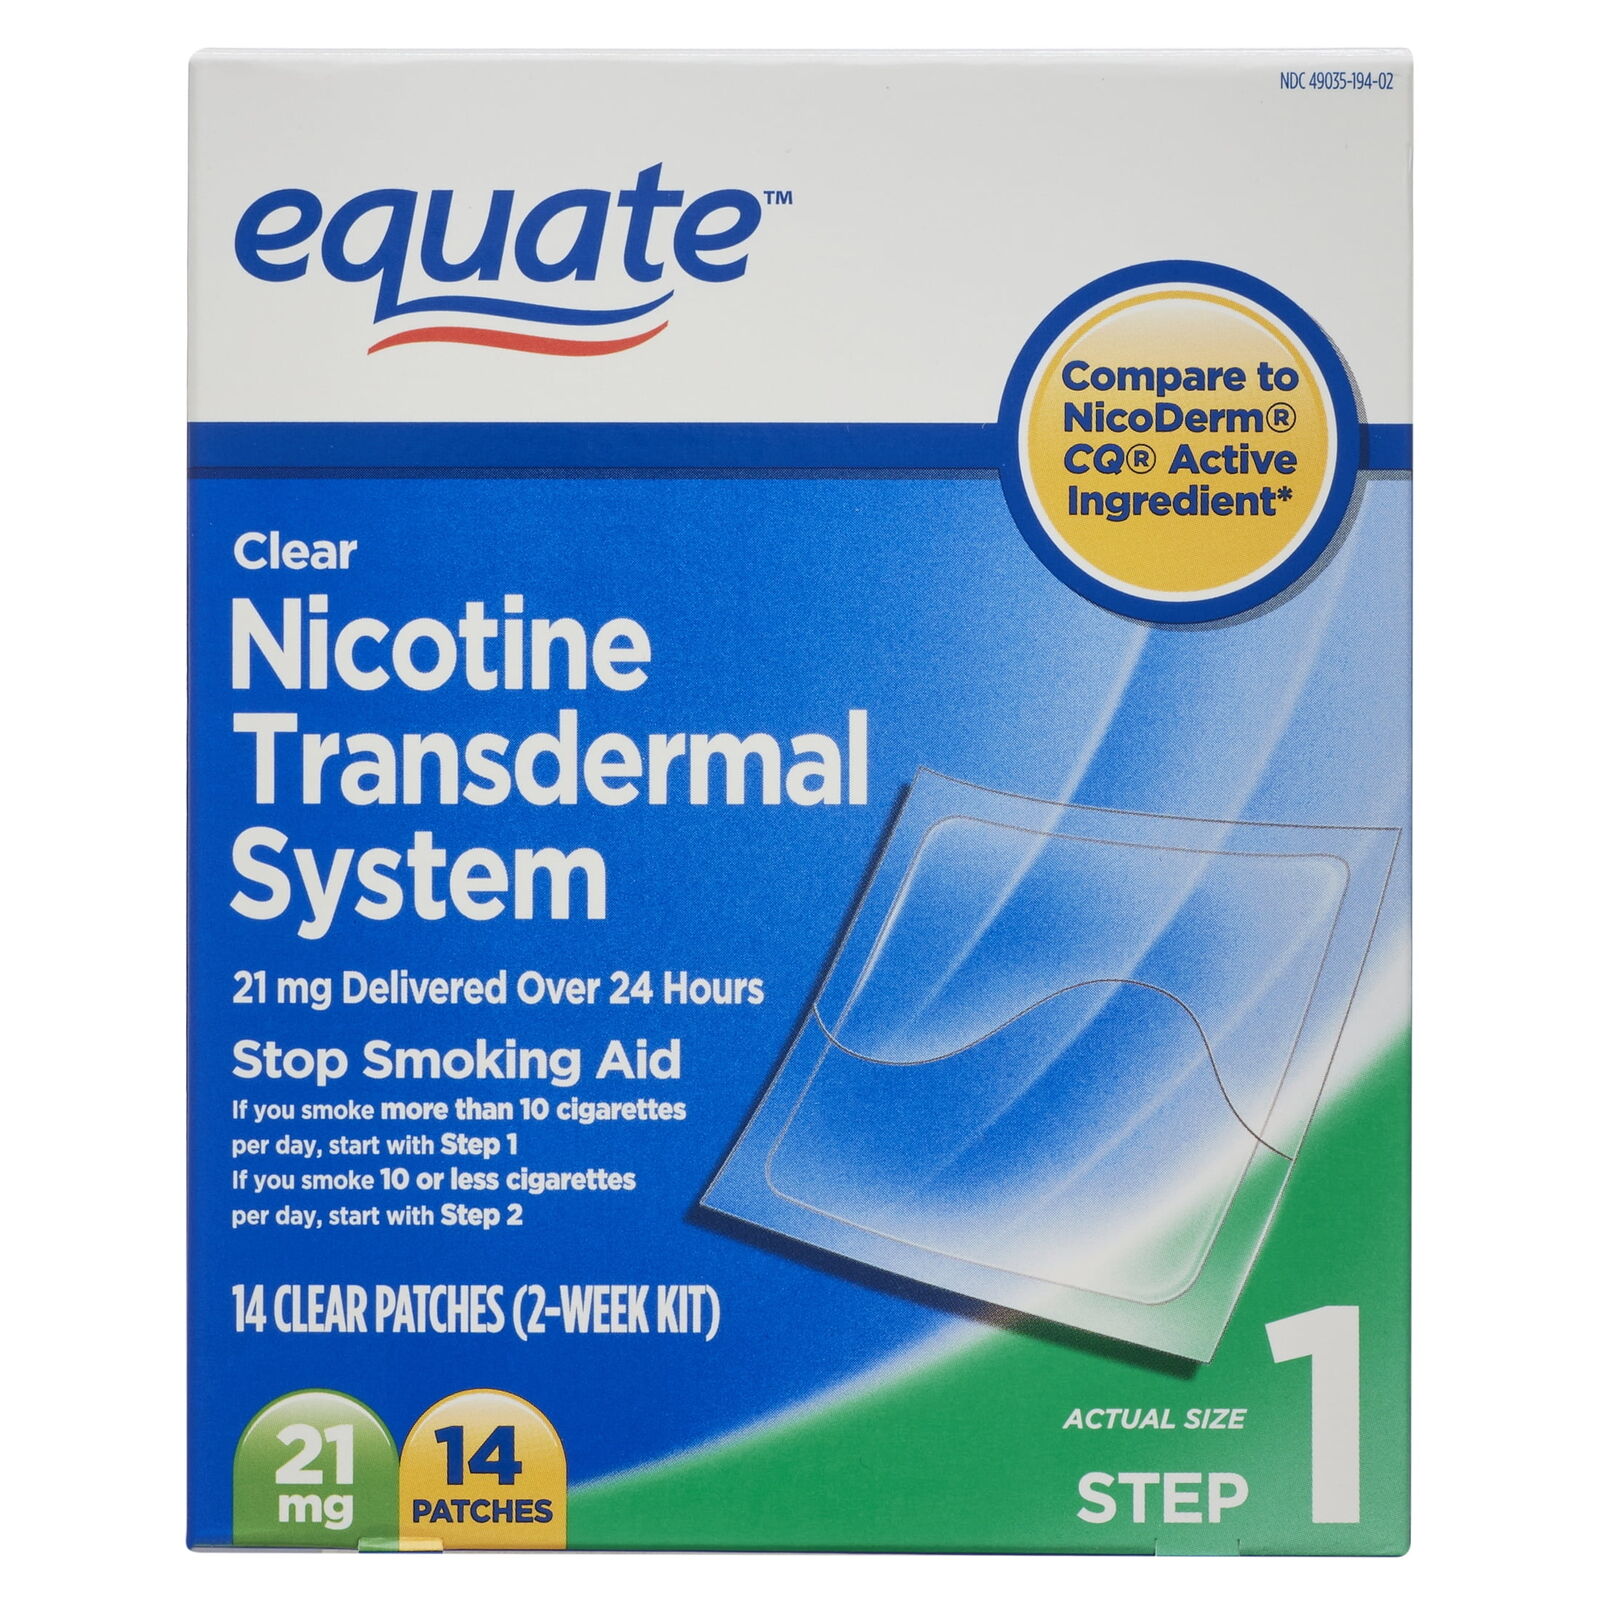 Equate Nicotine Transdermal System Step 1 Clear Patches, 21 mg, 14 Ct